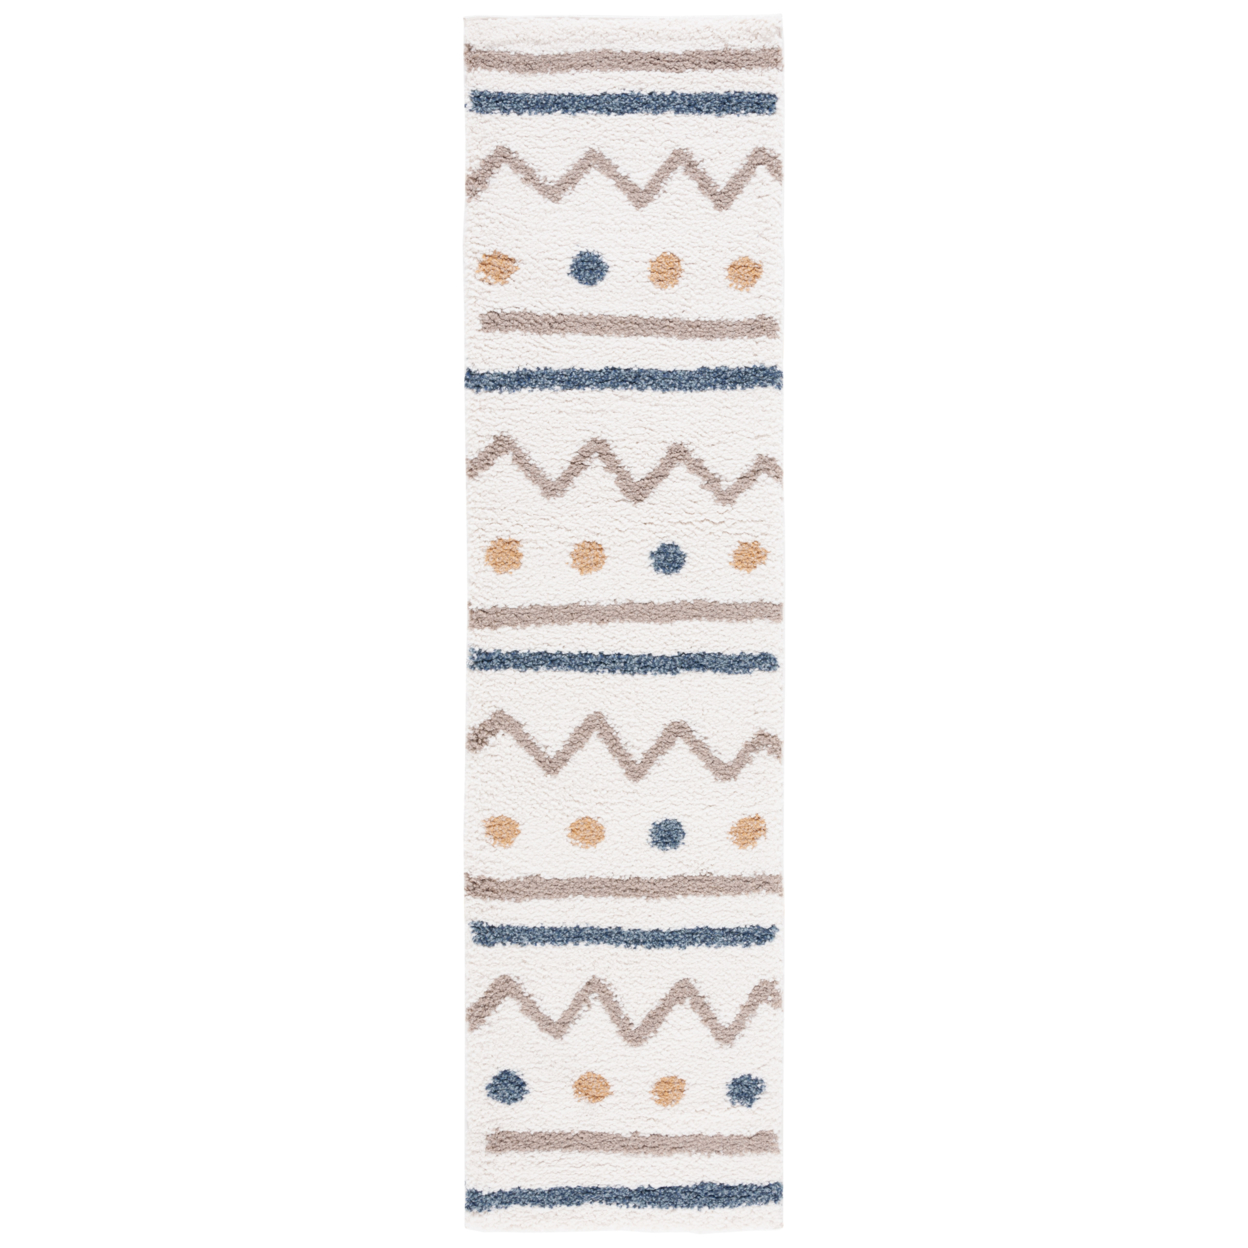 Safavieh CLC106A Calico Shag Ivory / Taupe - Teal / Green, 2'-2 X 8' Runner